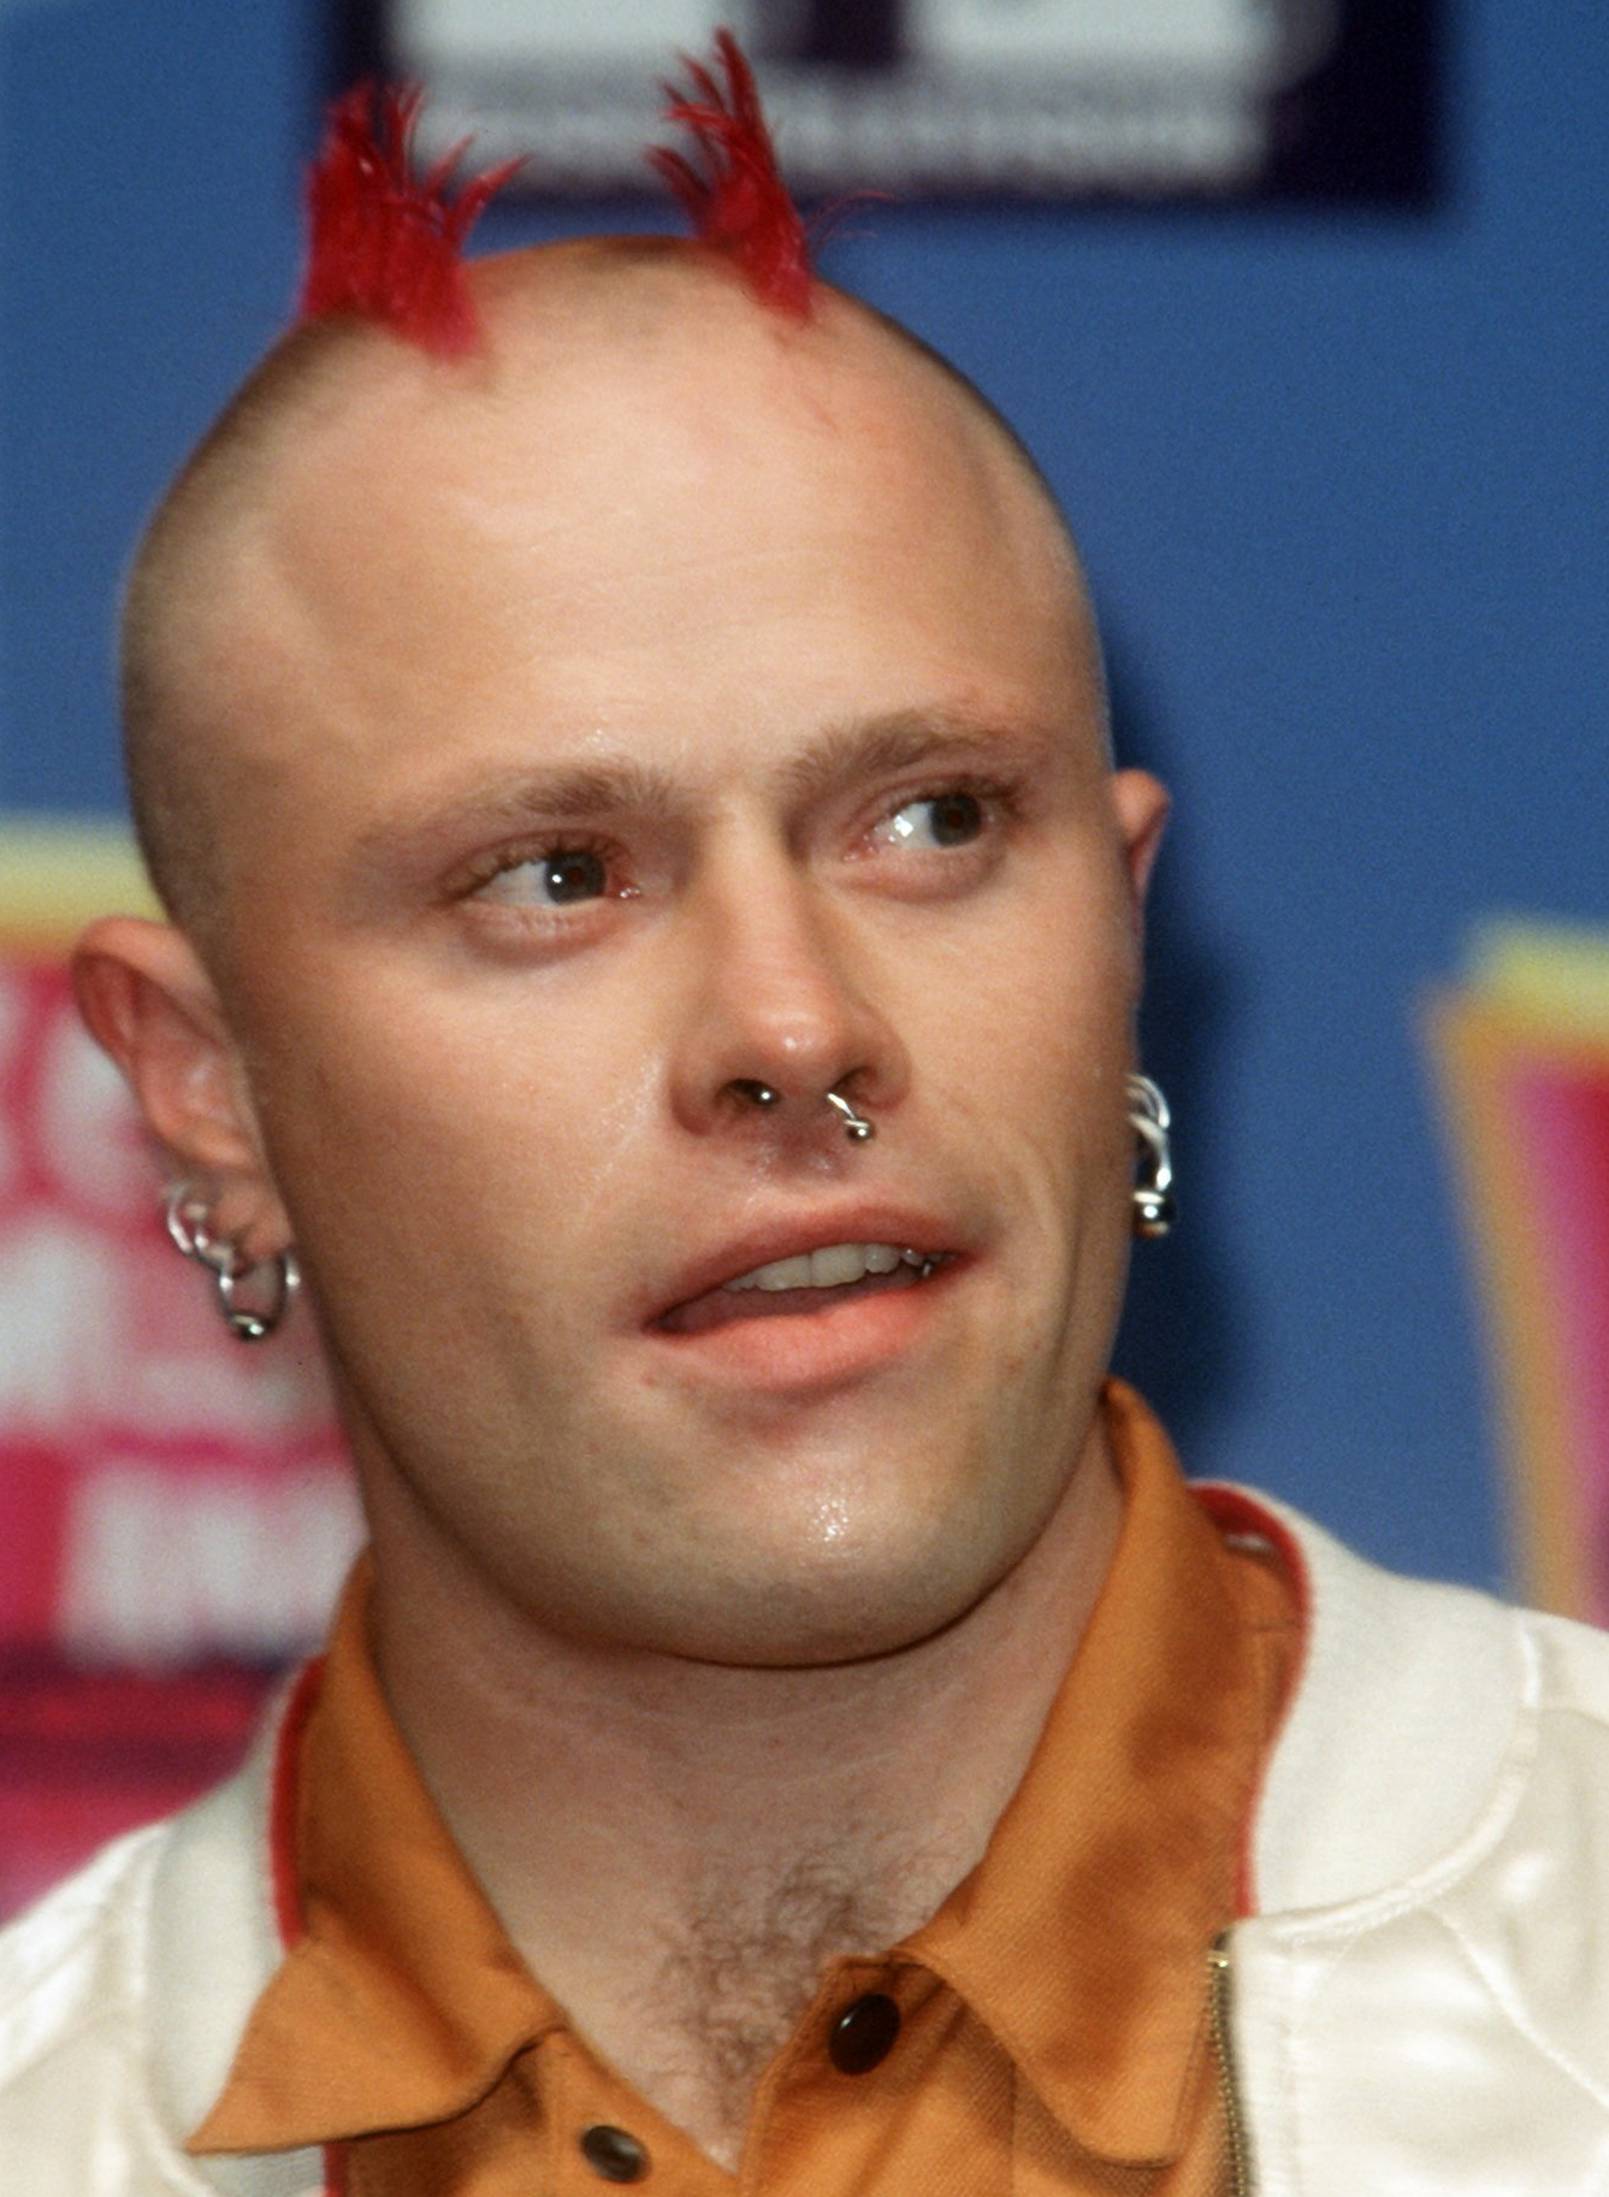 Keith Flint from the group Prodigy